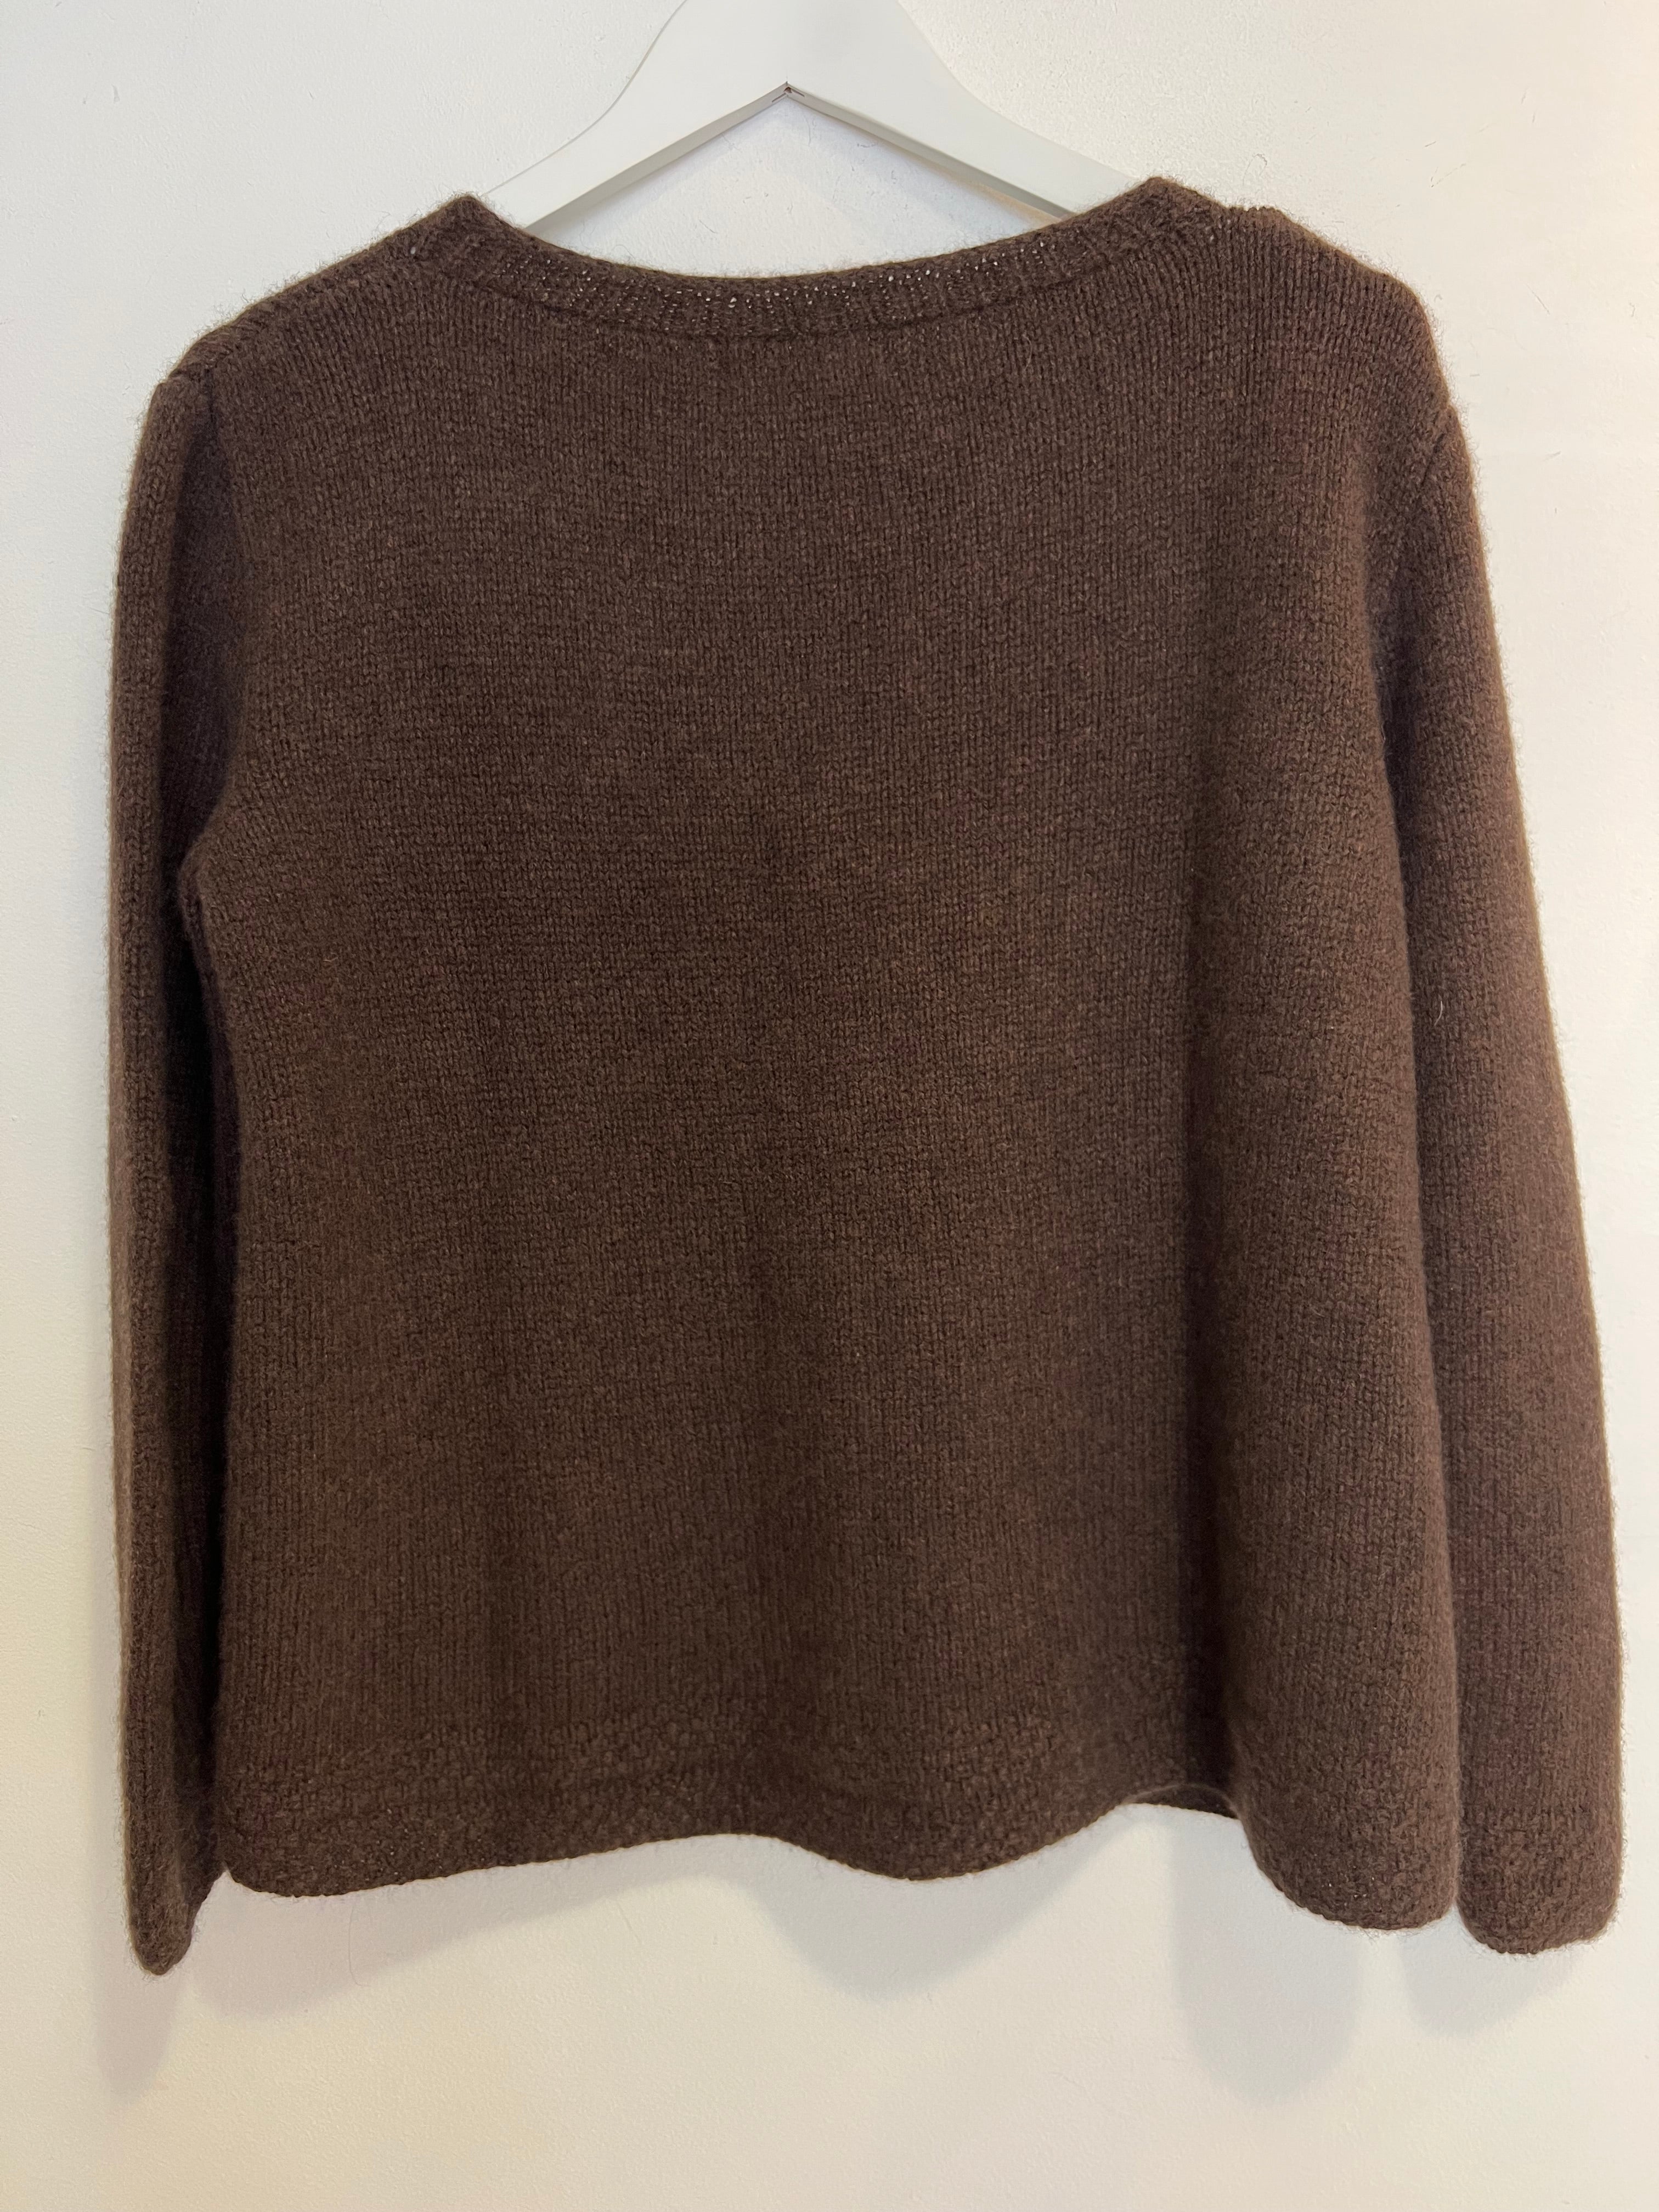 Hetre Alresford Hampshire Clothes Store English Weather Peat Guernsey Sweater  